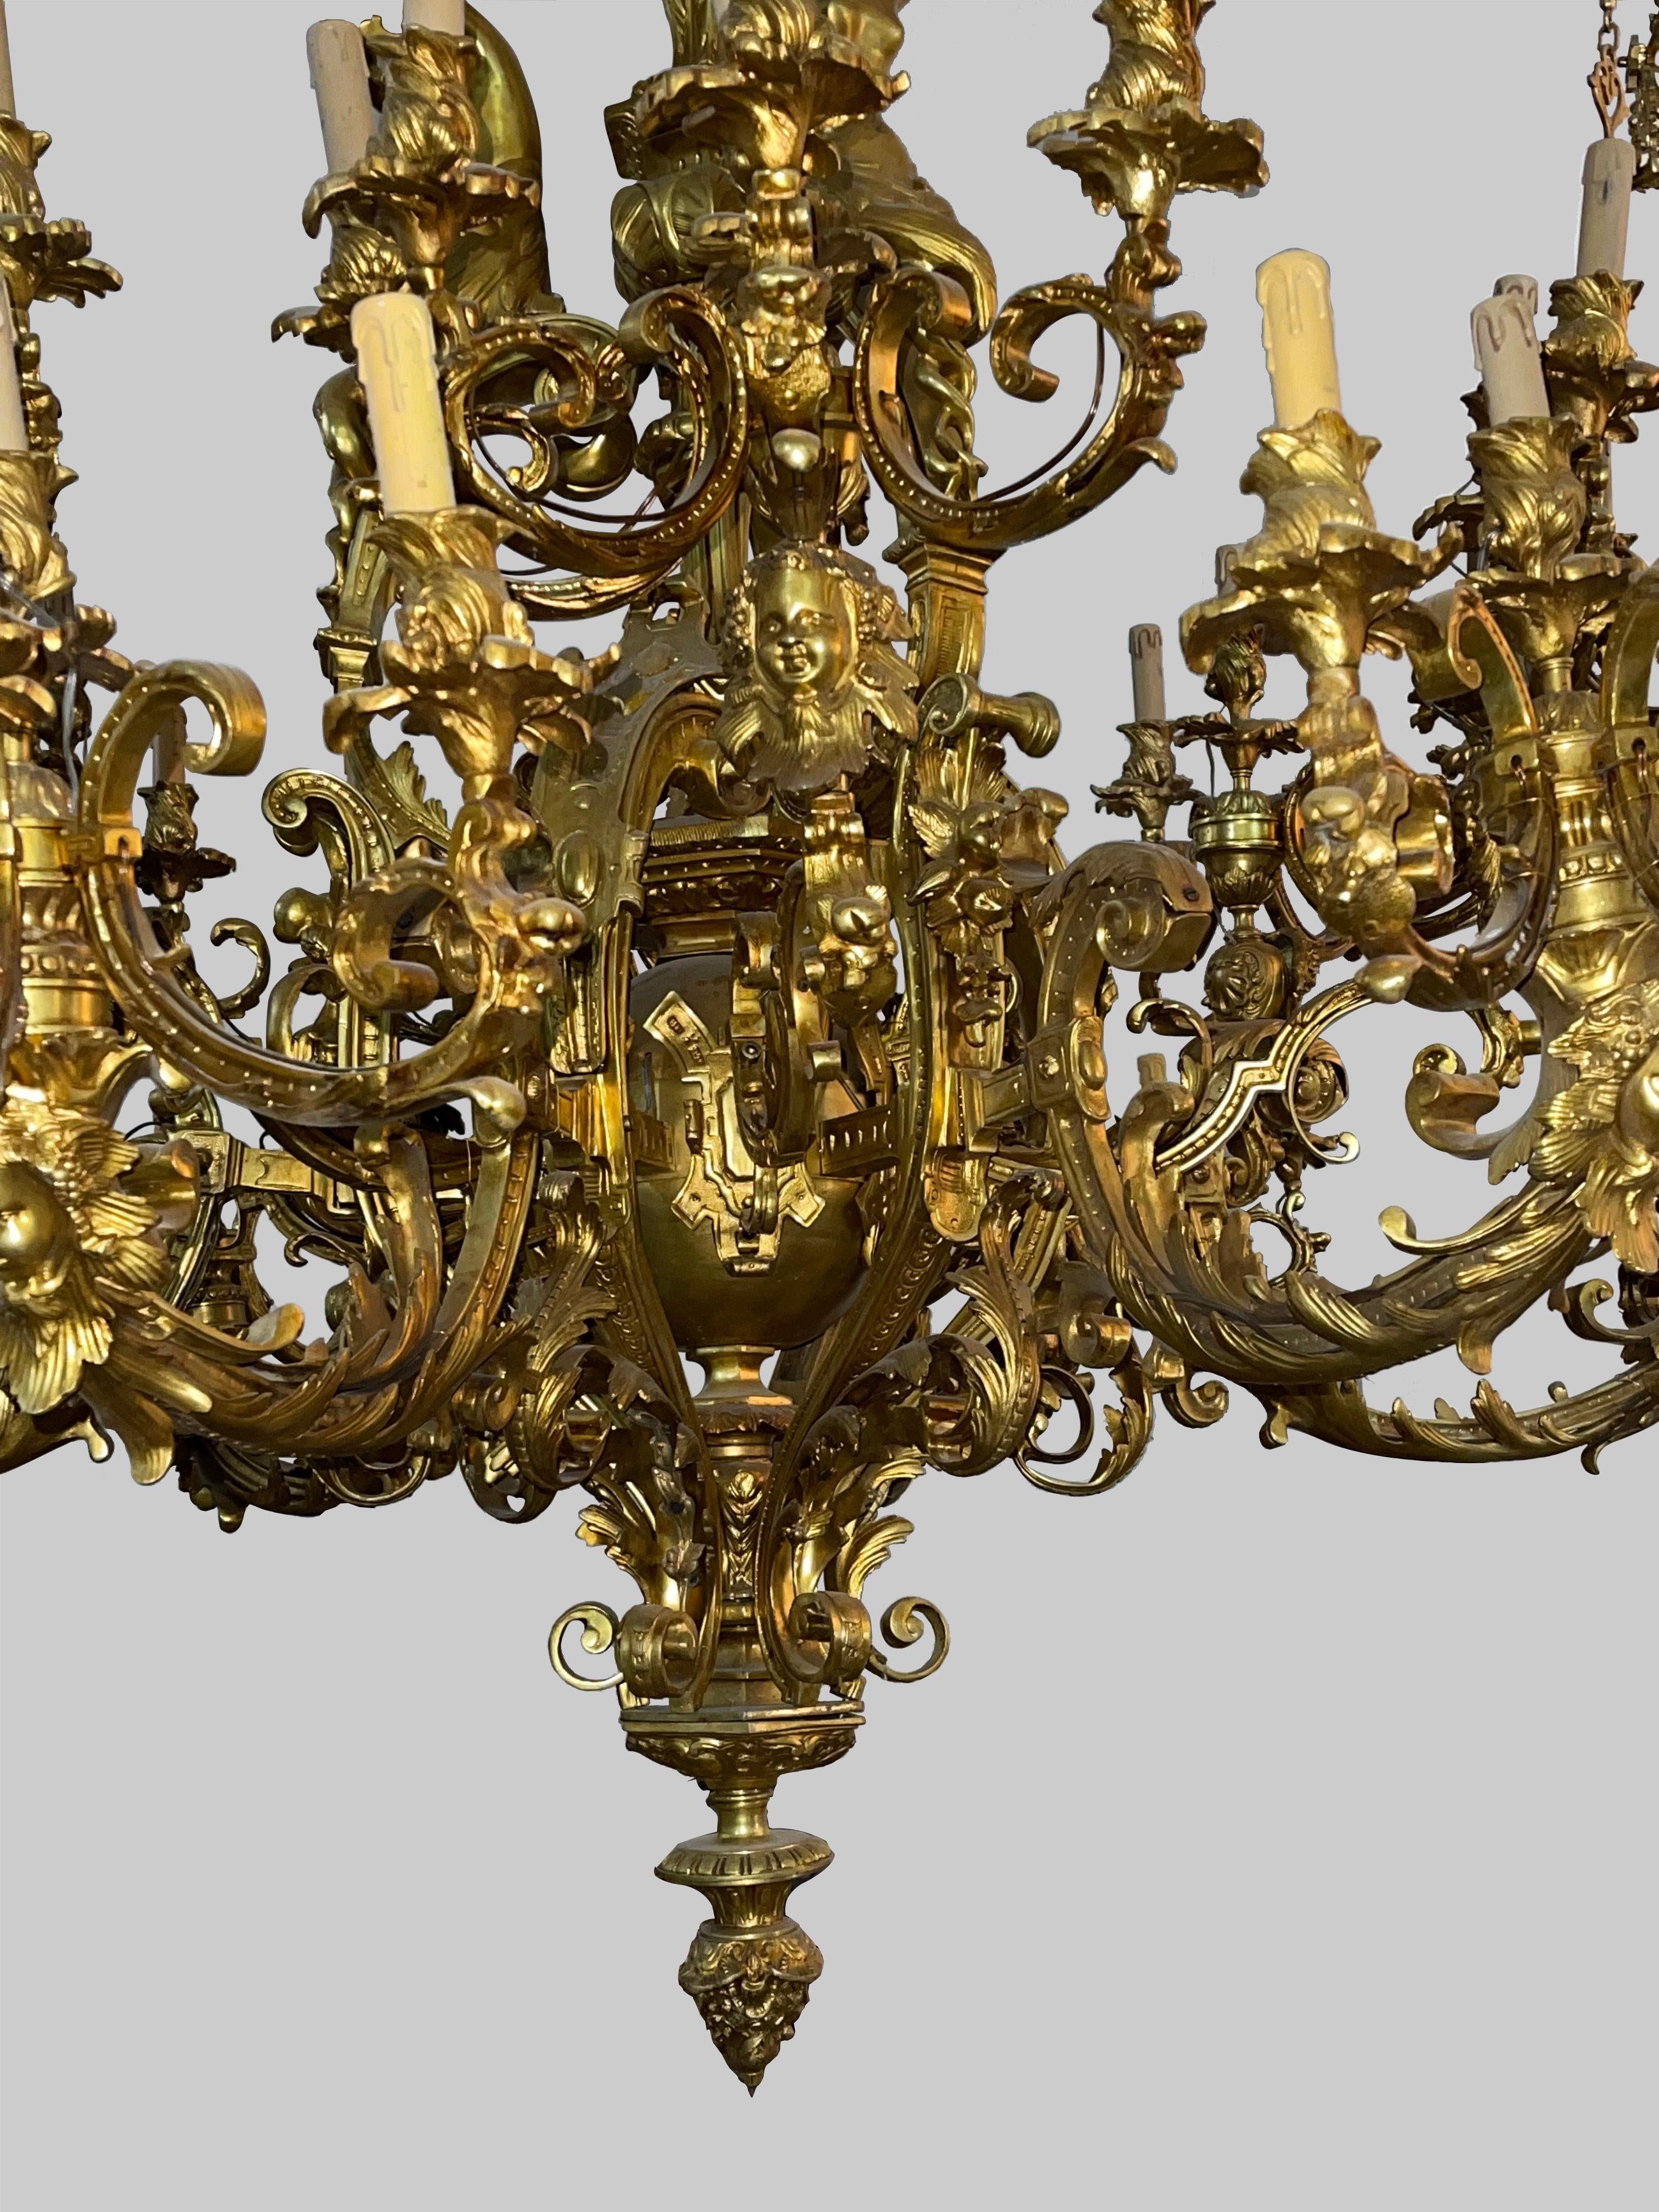 Monumental and impressive 60-light gilt Chandelier, Paris (1320 lbs)

Finely chased and gilded bronze. 60 flames, electrically wired in a bronze frame
Important chandelier bronze in Renaissance style. Lower part of 6 large set of 8 light-arms